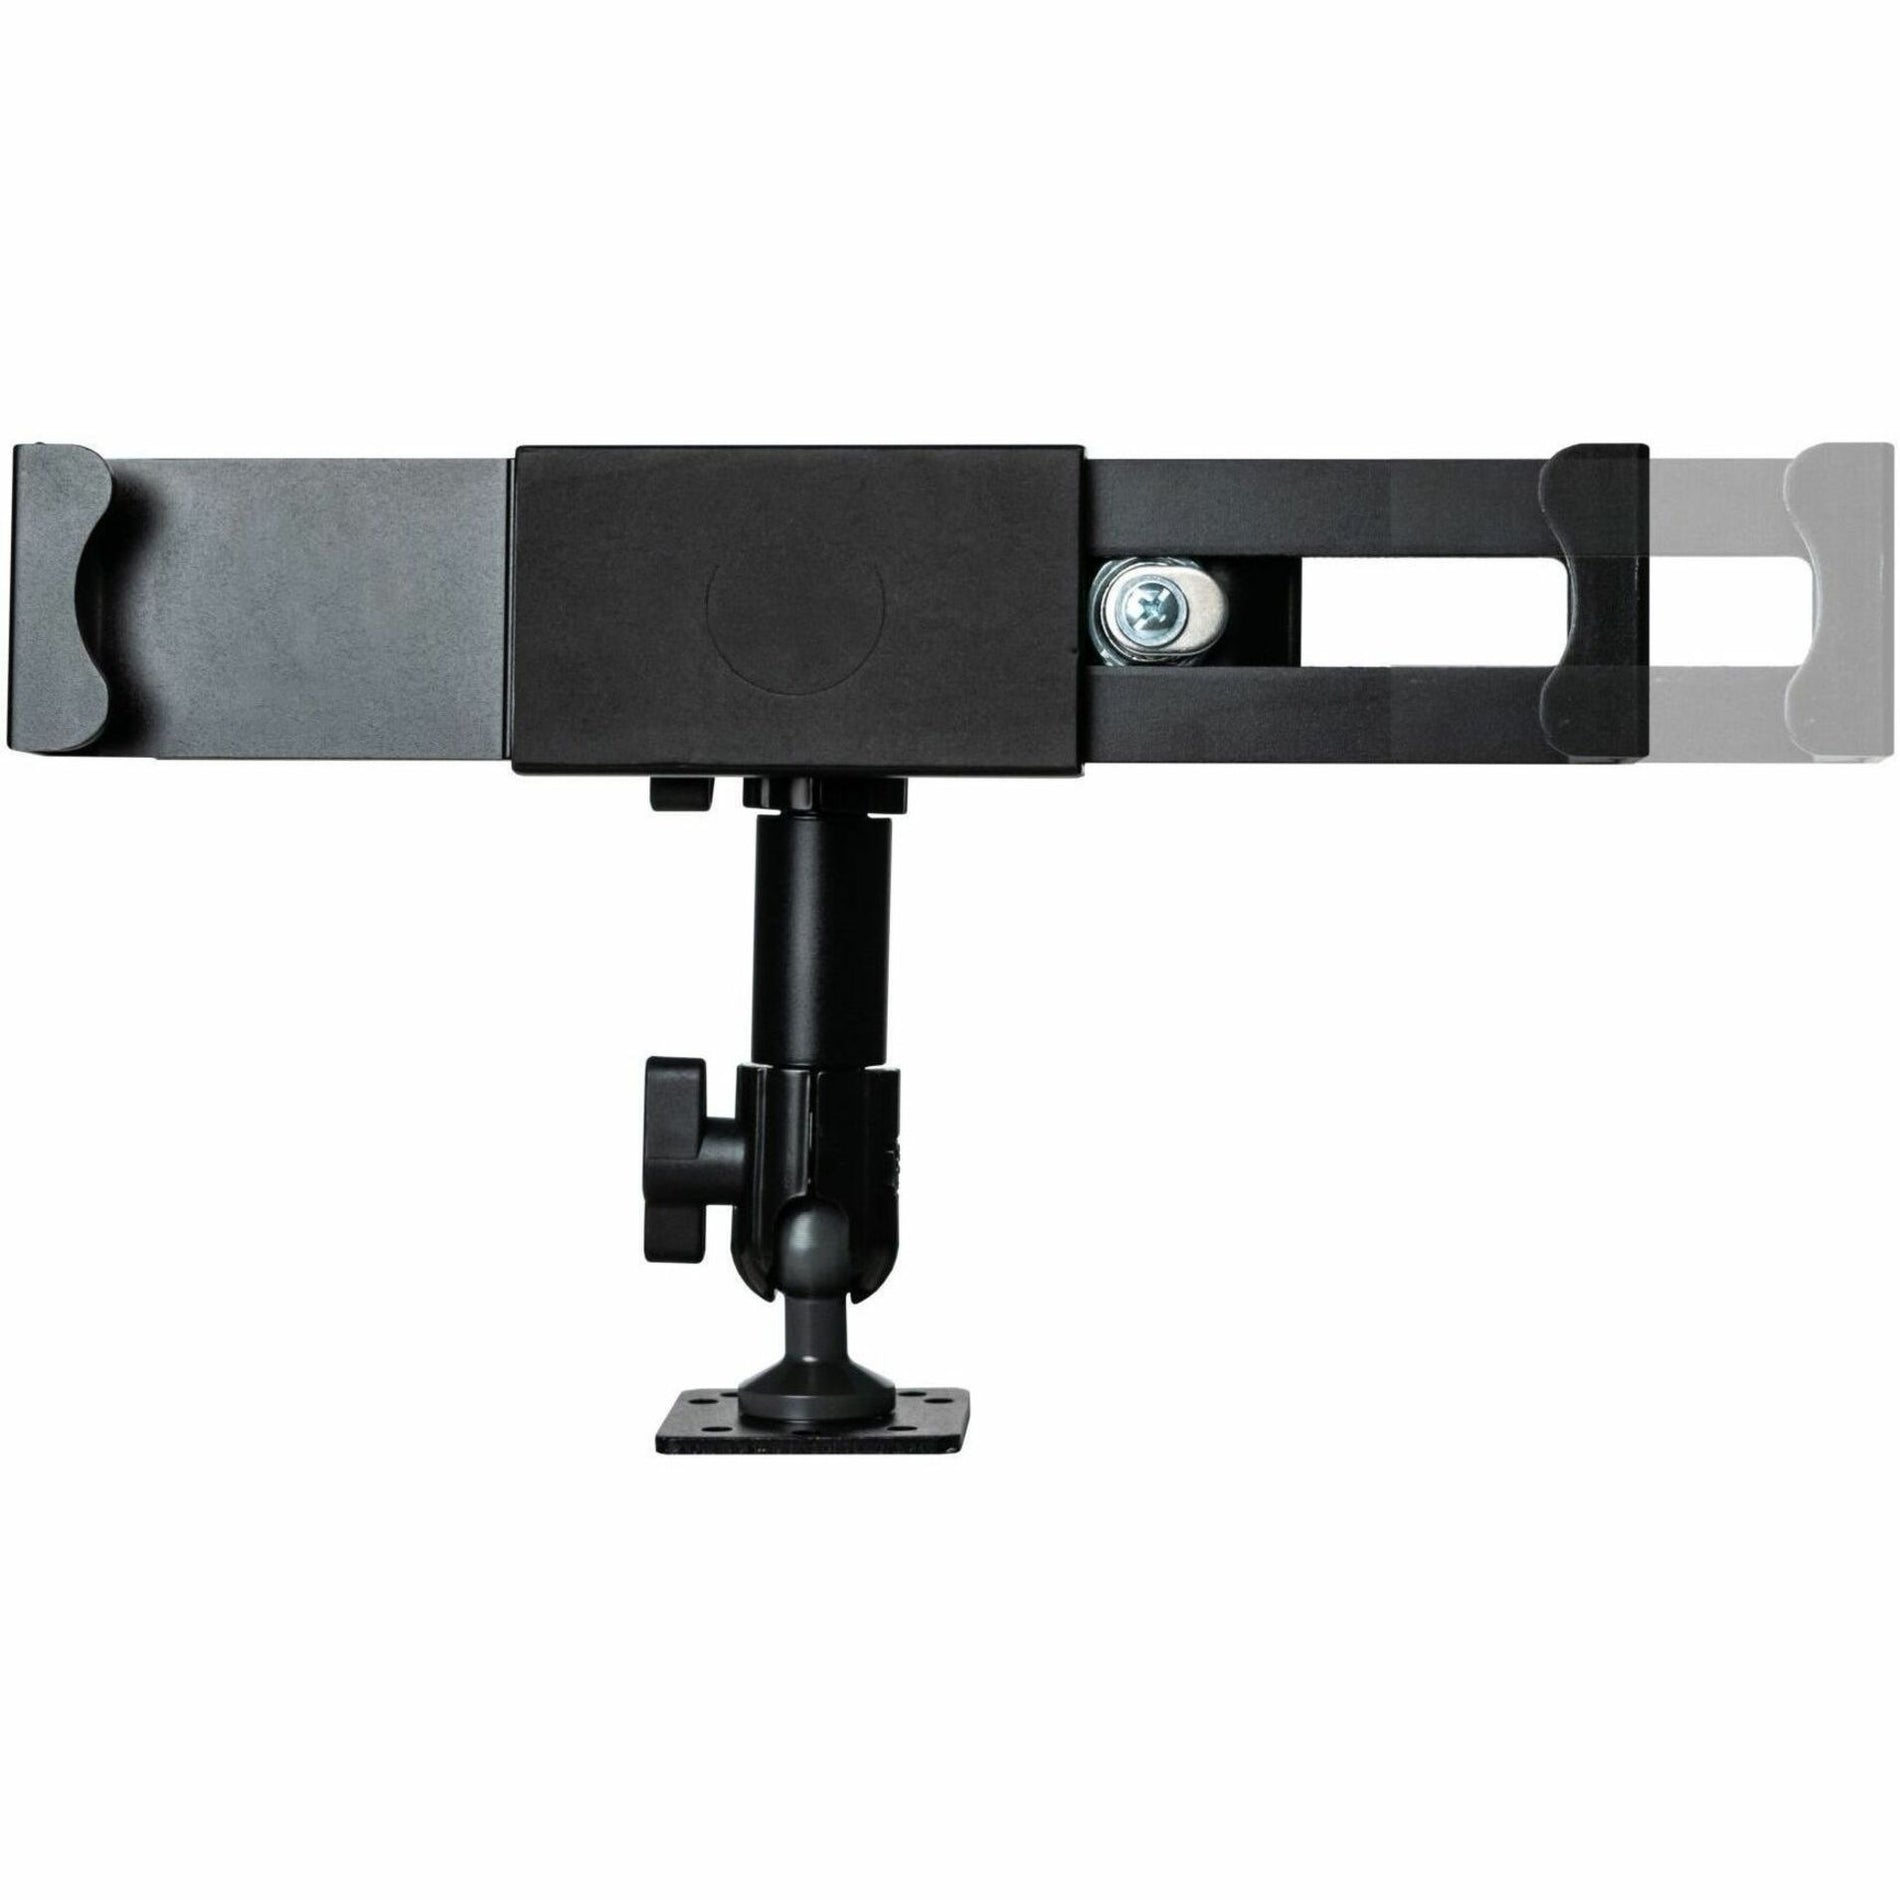 CTA Digital Dashboard, Tabletop, and Wall Mount for iPad and Tablets (AUT-VDMS)